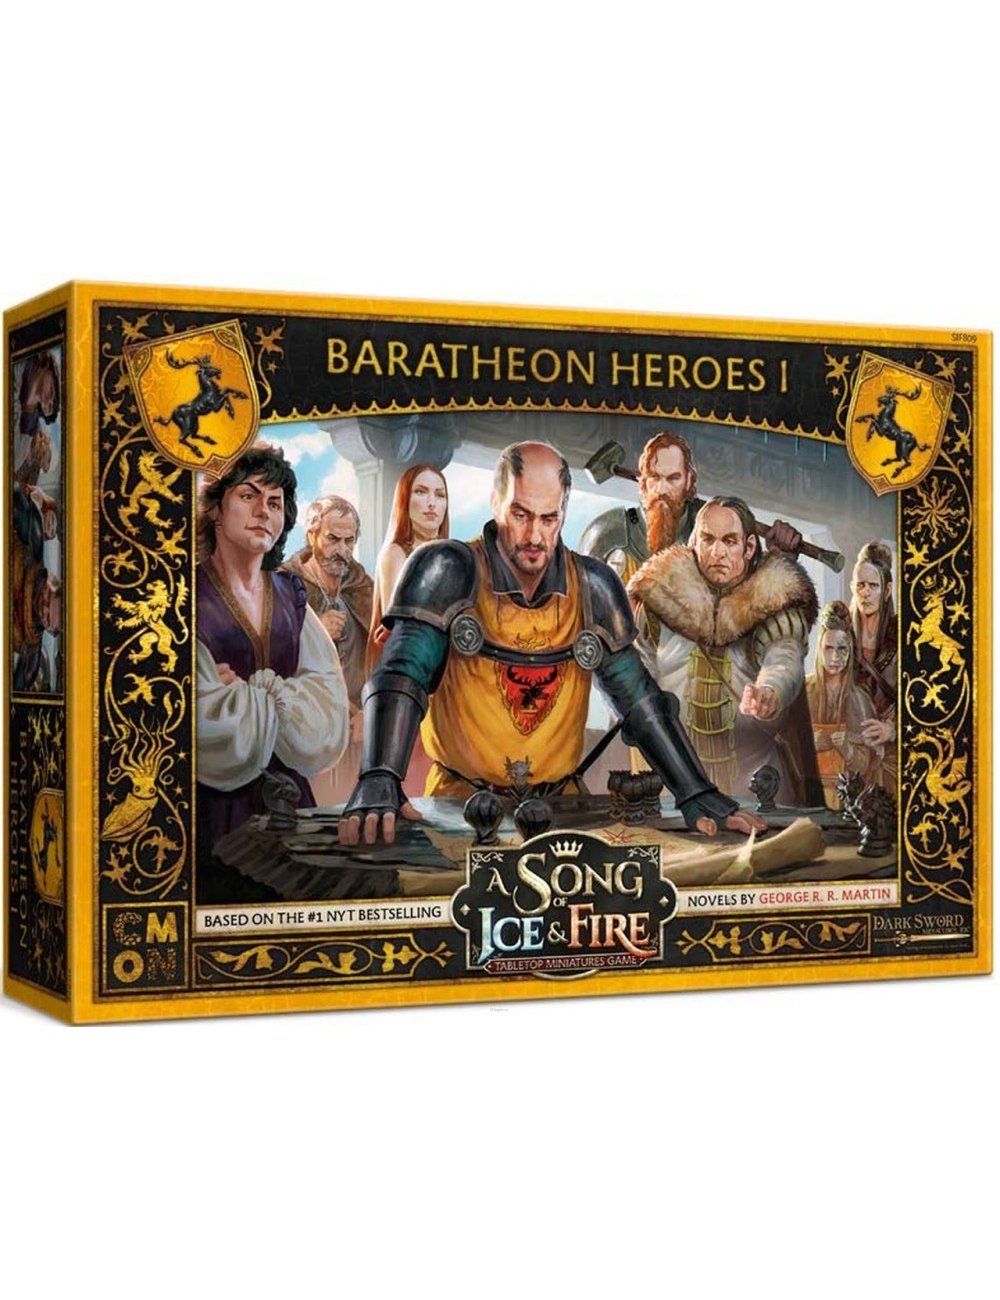 A SONG OF ICE & FIRE - Baratheon Heroes 1 (ENG)